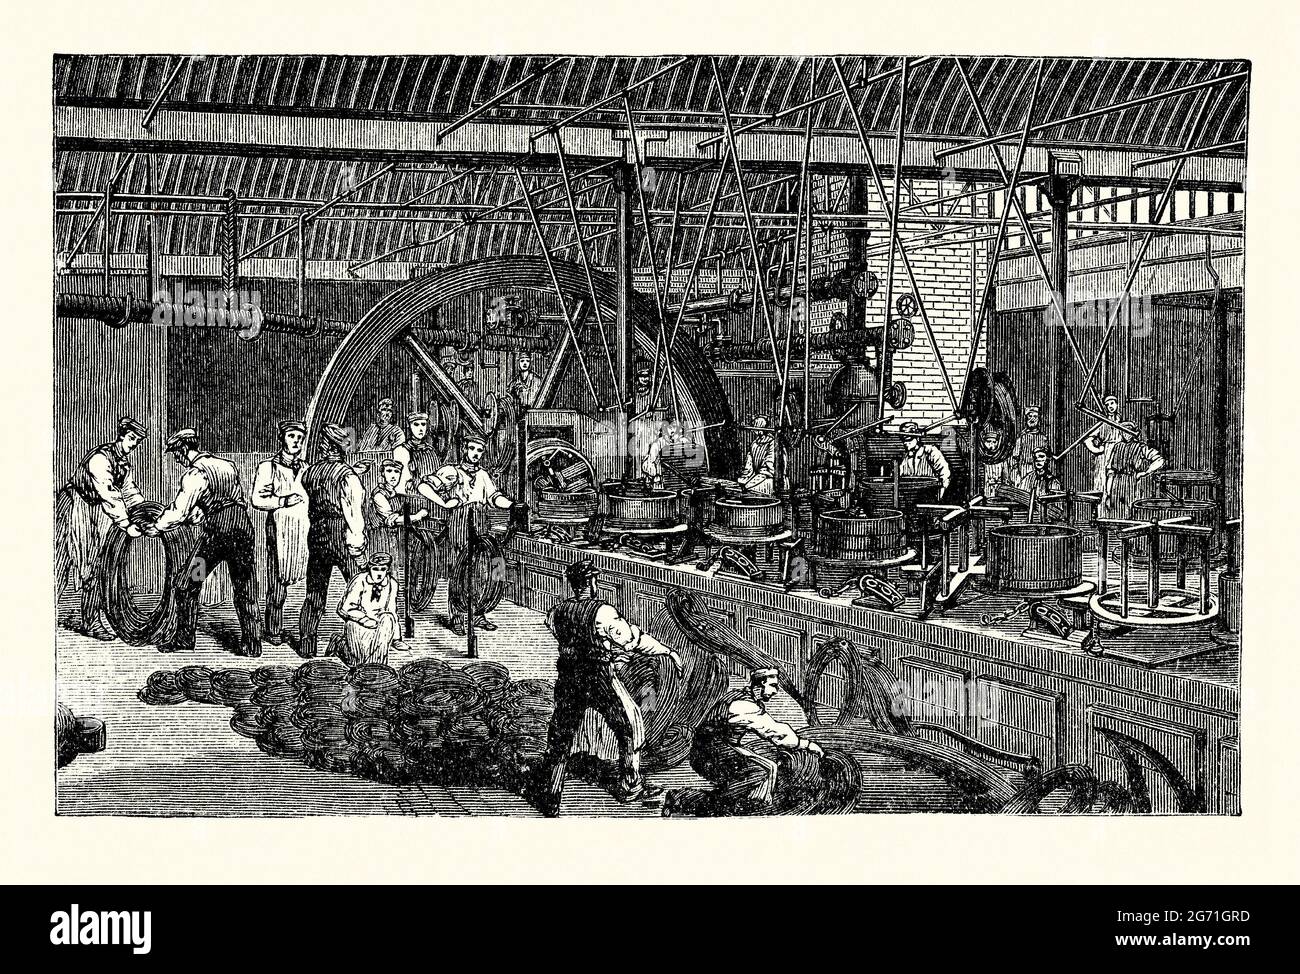 An old engraving of the outer, iron wire covering of the transatlantic telegraph cables being made at the factory of Webster & Horsfall, Birmingham, England, UK c.1865. It is from a book of the 1890s on Victorian discoveries and inventions during the 1800s. The cables themselves were manufactured by Glass, Elliot and Company in Greenwich, London. The cables were laid under the Atlantic Ocean for telegraph communications. This second cable was laid in 1865 from Brunel’s ship SS Great Eastern. The cable broke in mid-Atlantic; after many rescue attempts, it was abandoned. Stock Photo